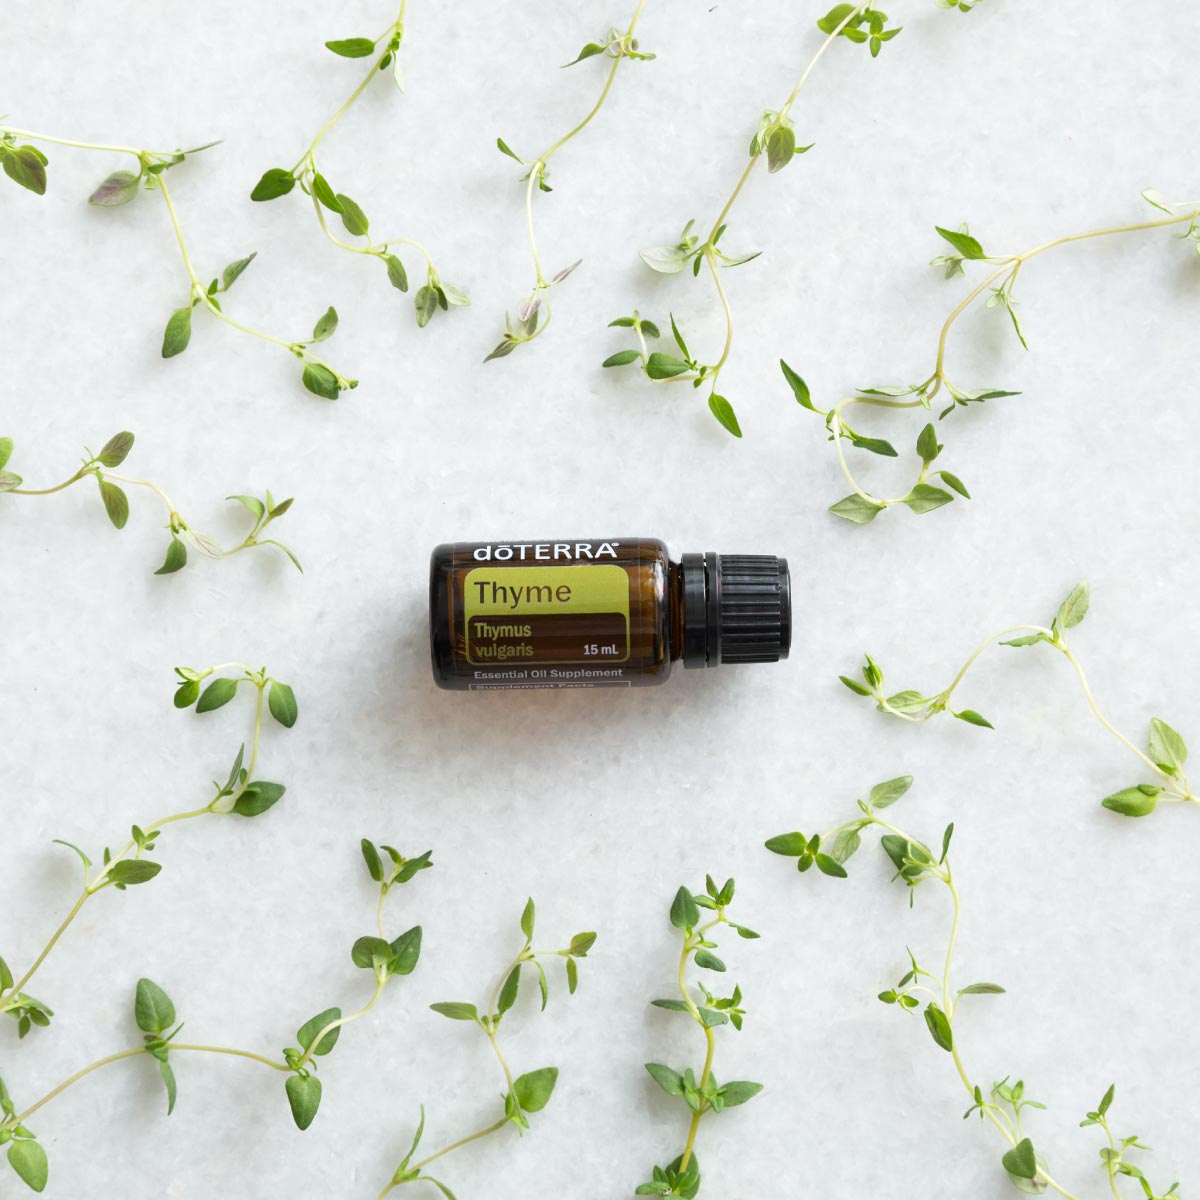 Bottle of doTERRA Thyme oil surrounded by green leaves. What is Thyme oil good for? Thyme essential oil can be used to support a healthy immune system, provide the body with antioxidants, and add flavoring to food when cooking.